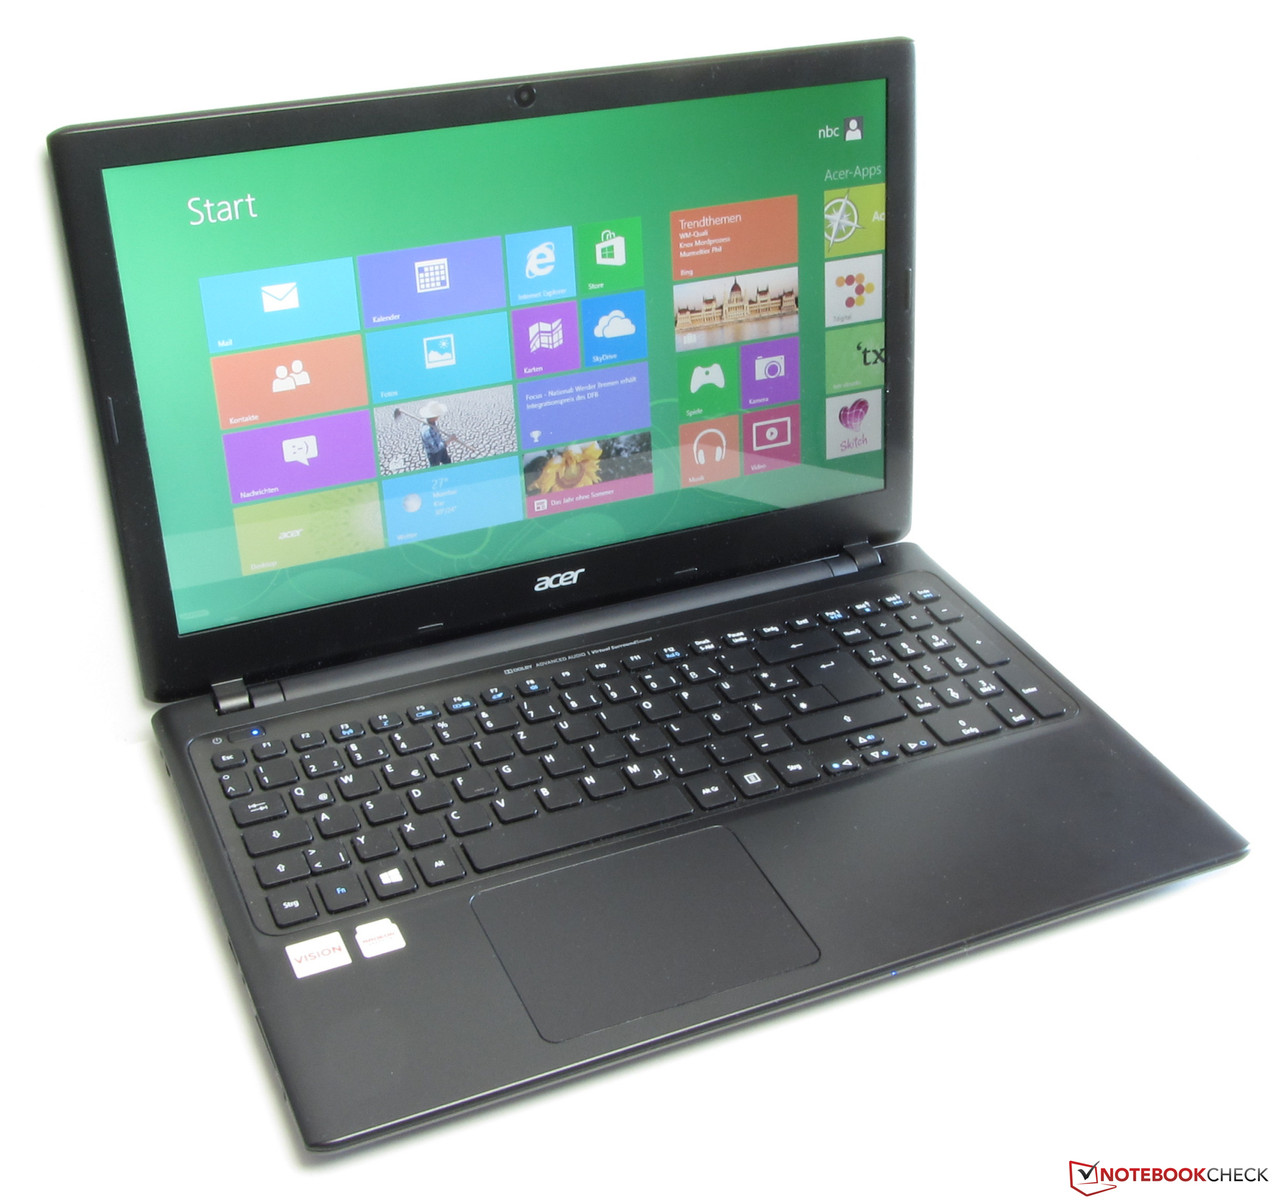 Acer aspire wifi driver download